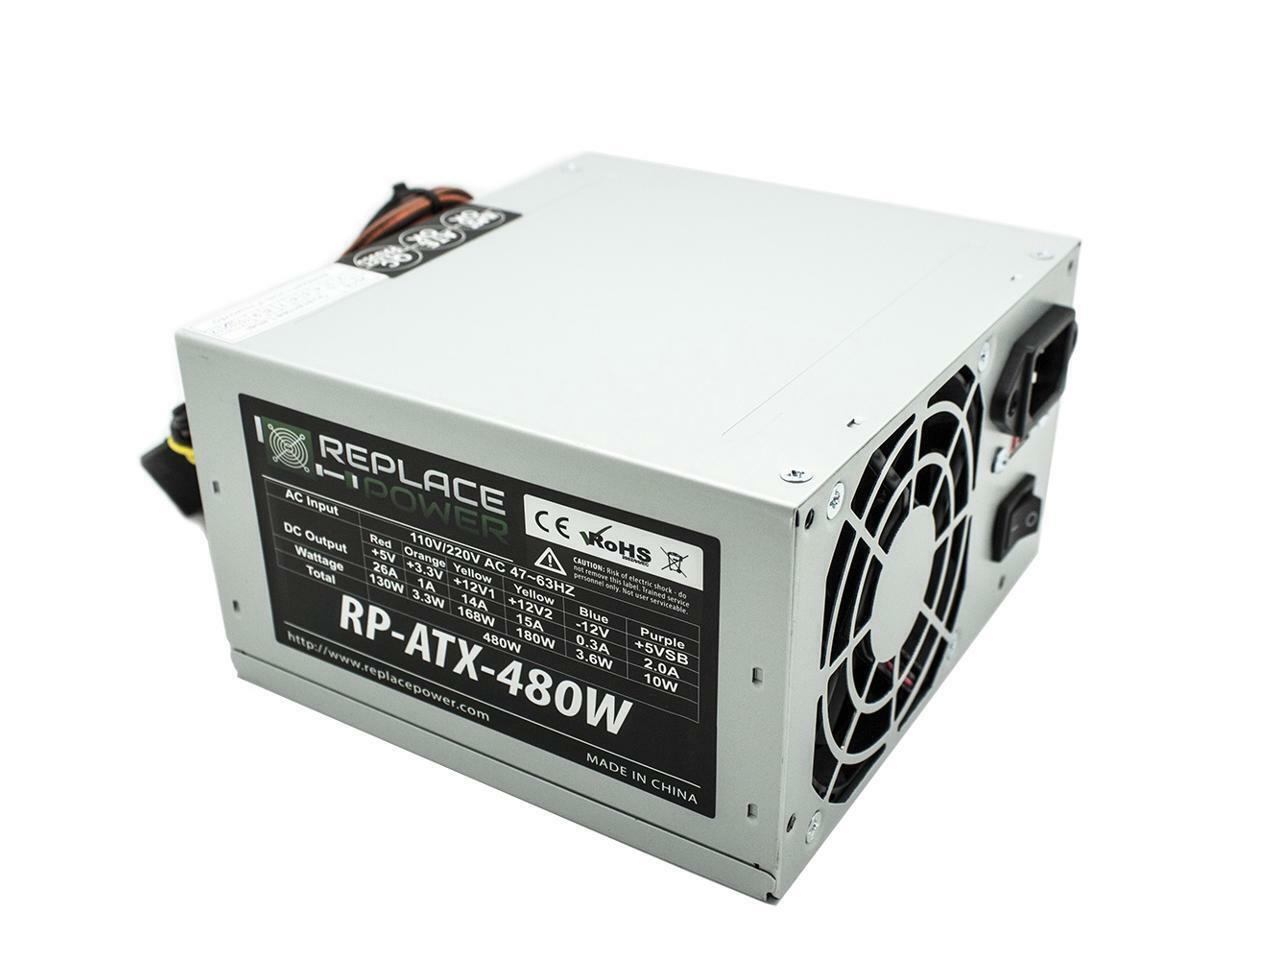 Replace Power 480W ATX Power Supply for HP 266503-001 p7-1141 DPS-250KB-2 B